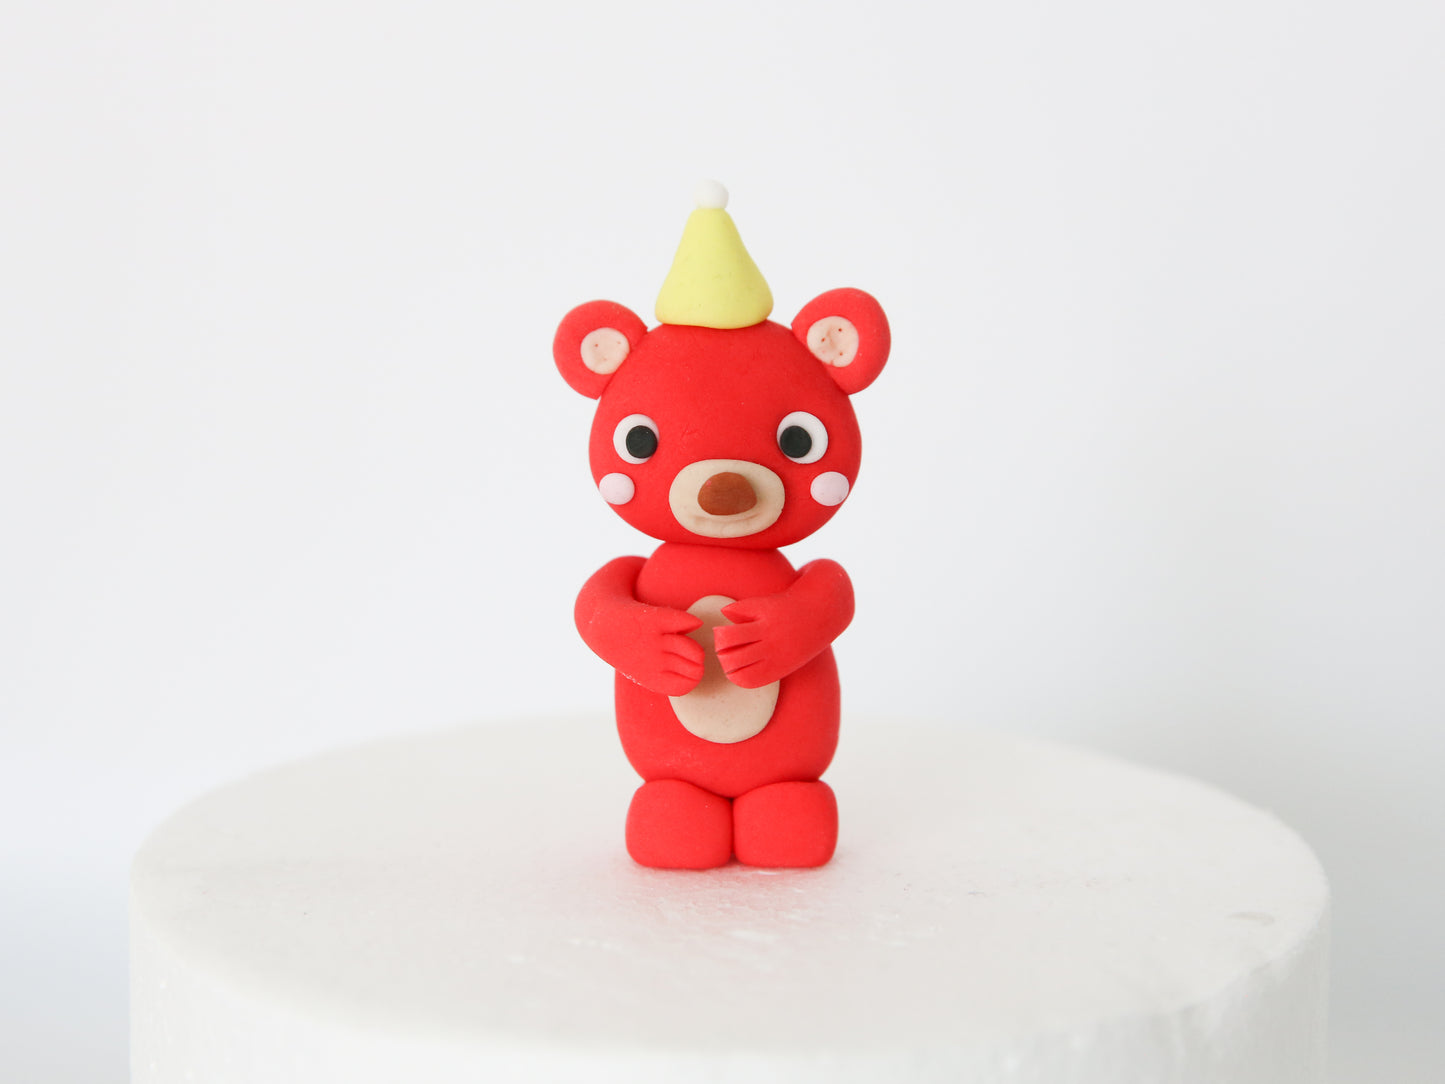 Cartoon Character Melon Inspired Baby and Animal Cake Toppers